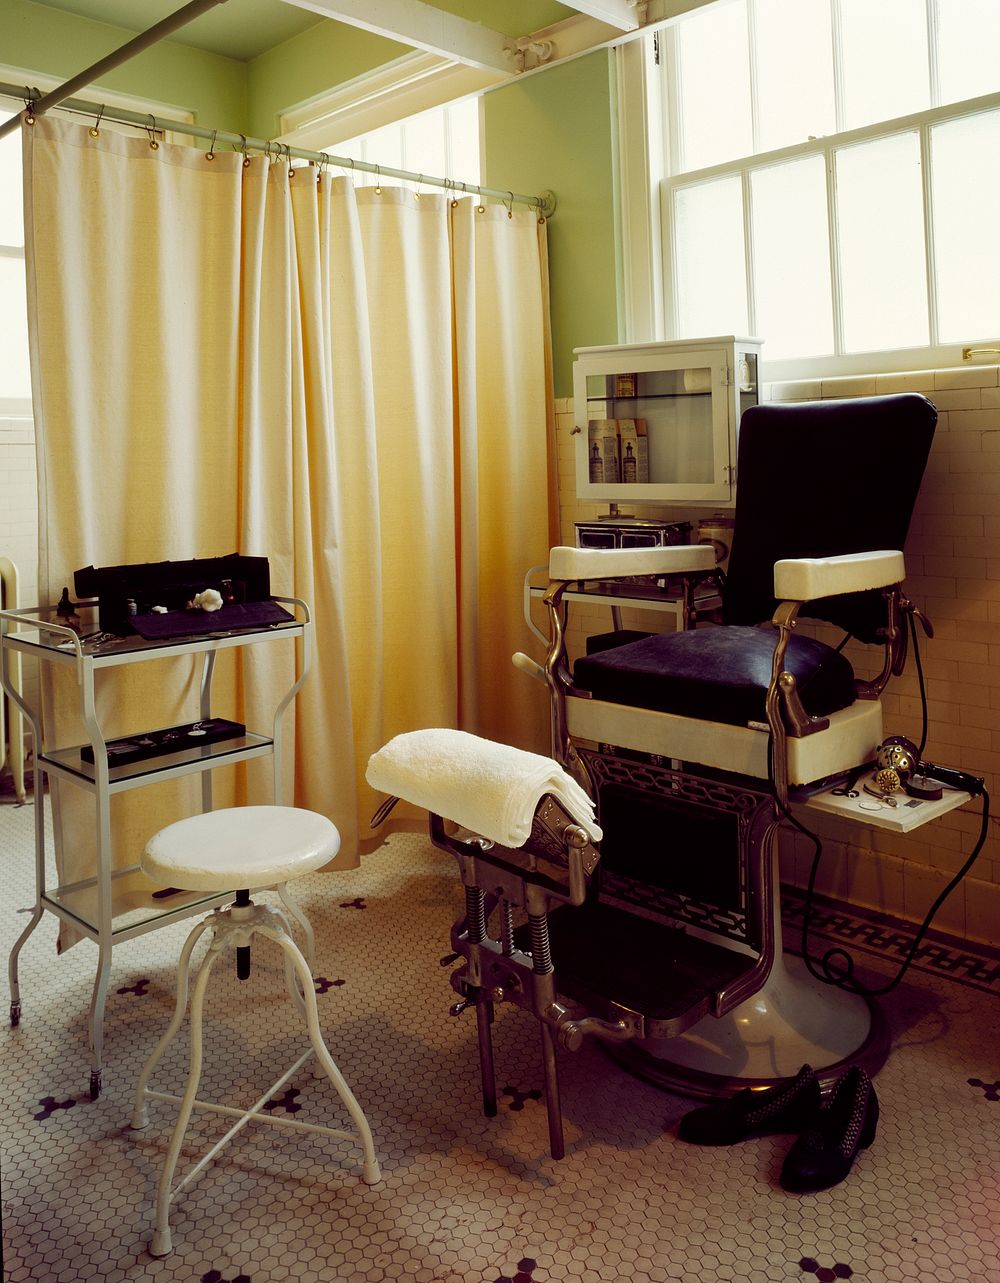 Chiropodist room at the Fordyce Bathhouse in Hot Springs, Arkansas (1980-2006) by Carol M. Highsmith. Original image from…